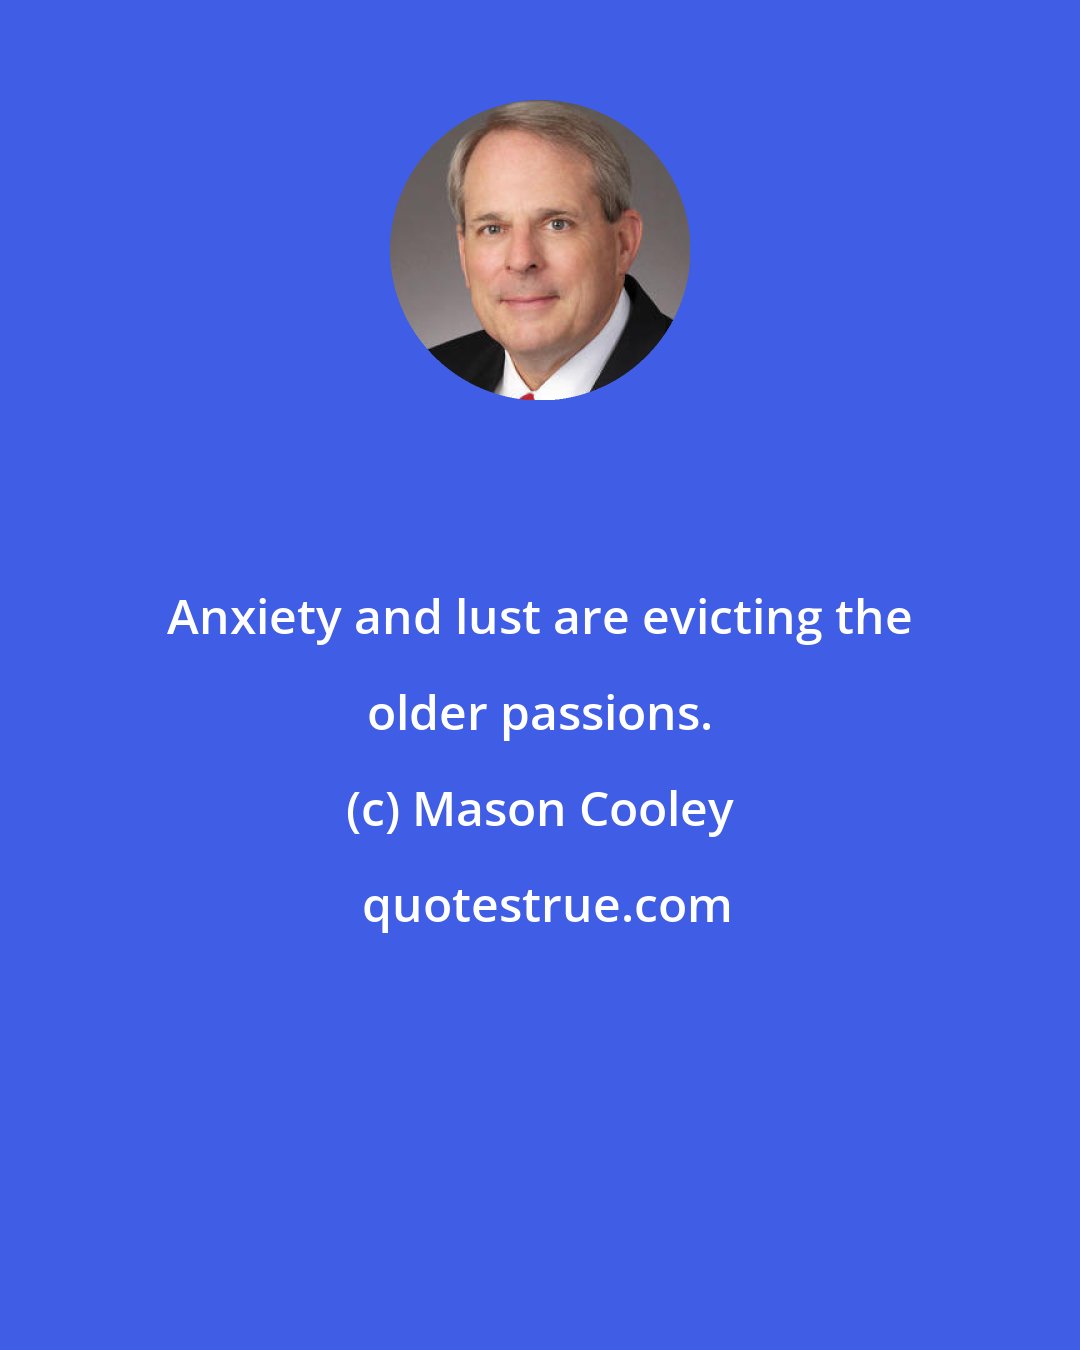 Mason Cooley: Anxiety and lust are evicting the older passions.